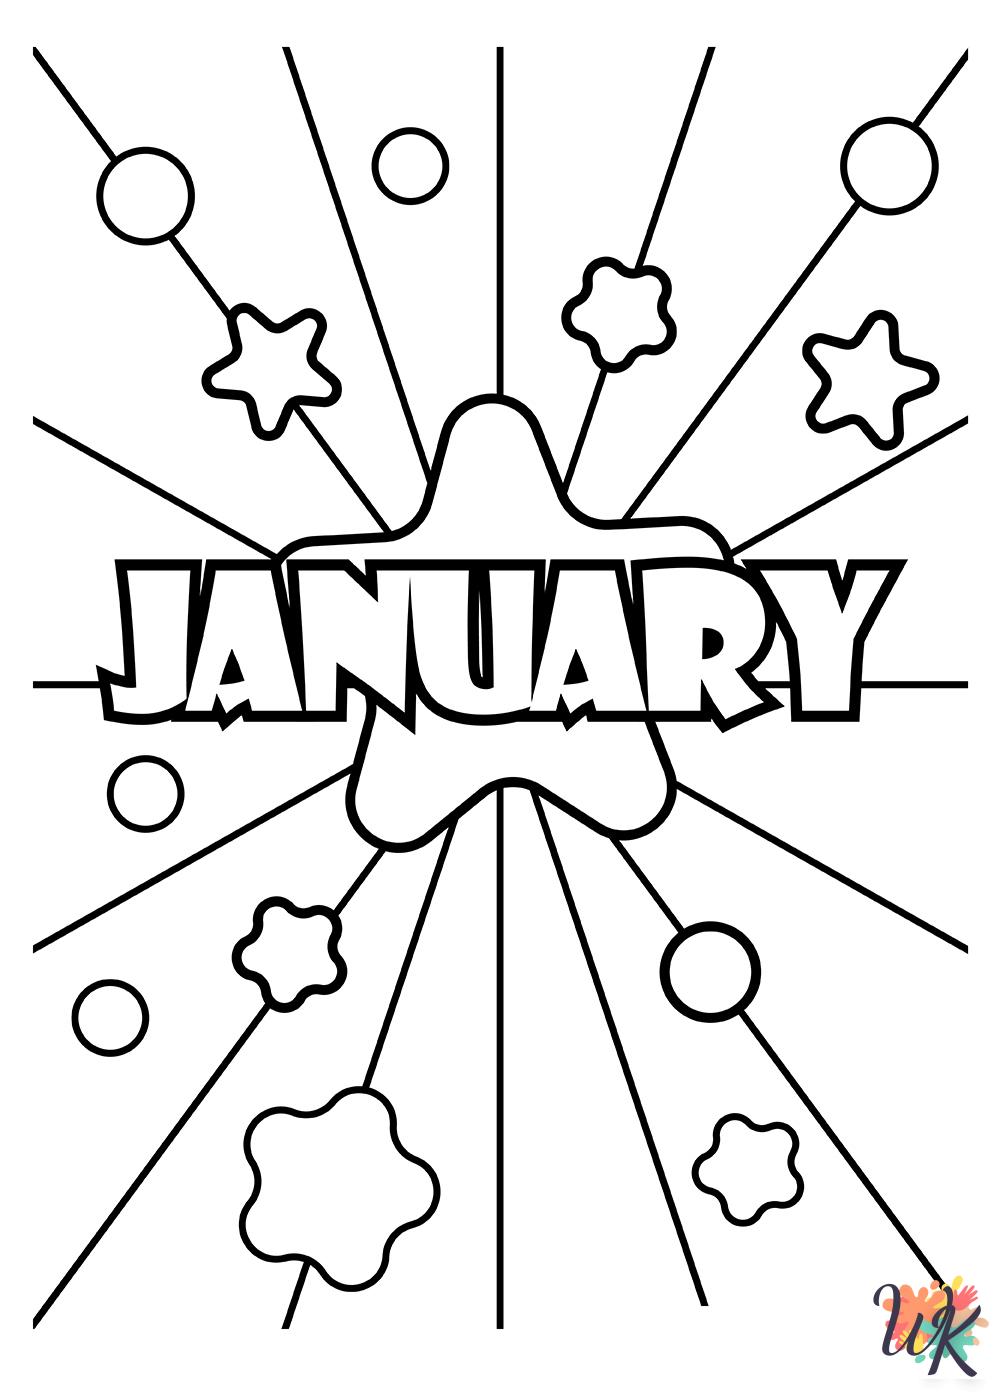 old-fashioned January coloring pages